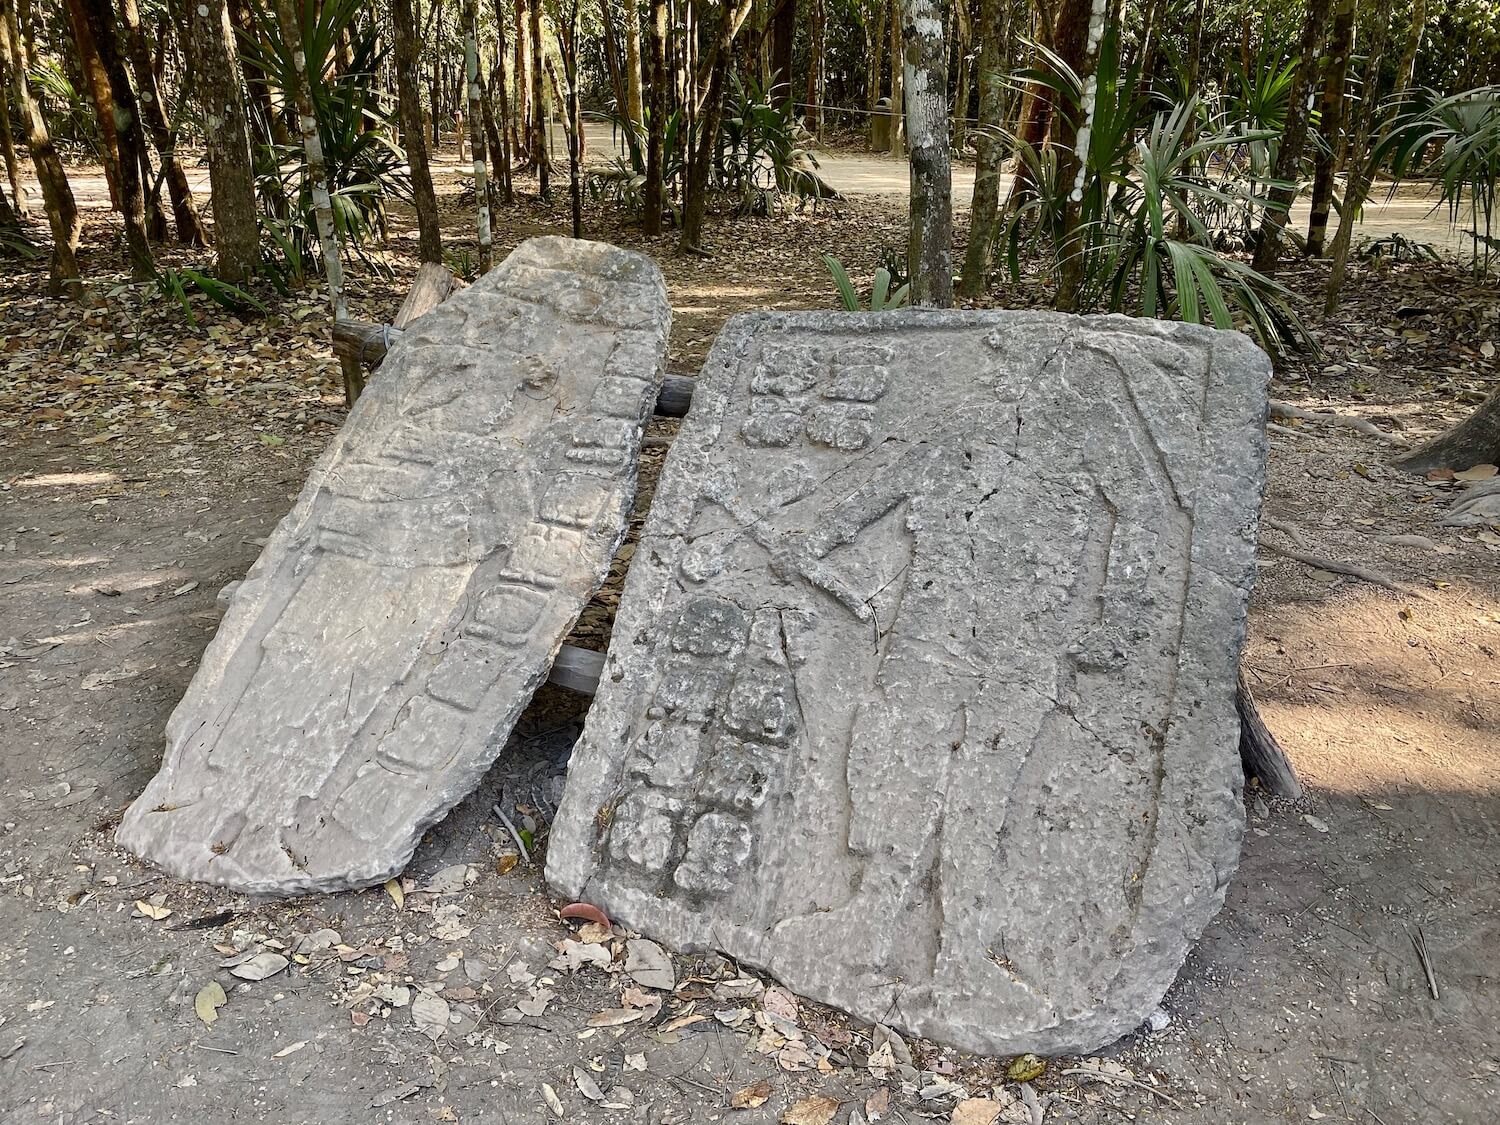 Two pieces of stone with carvings etched into them depicting mayan warriors.  The stones are known as Stele and around from the 7th century.  These stones are gray in color and are propped up against a wood support structure in amounts tropical plants in a dusty area of the Coba Ruins.  